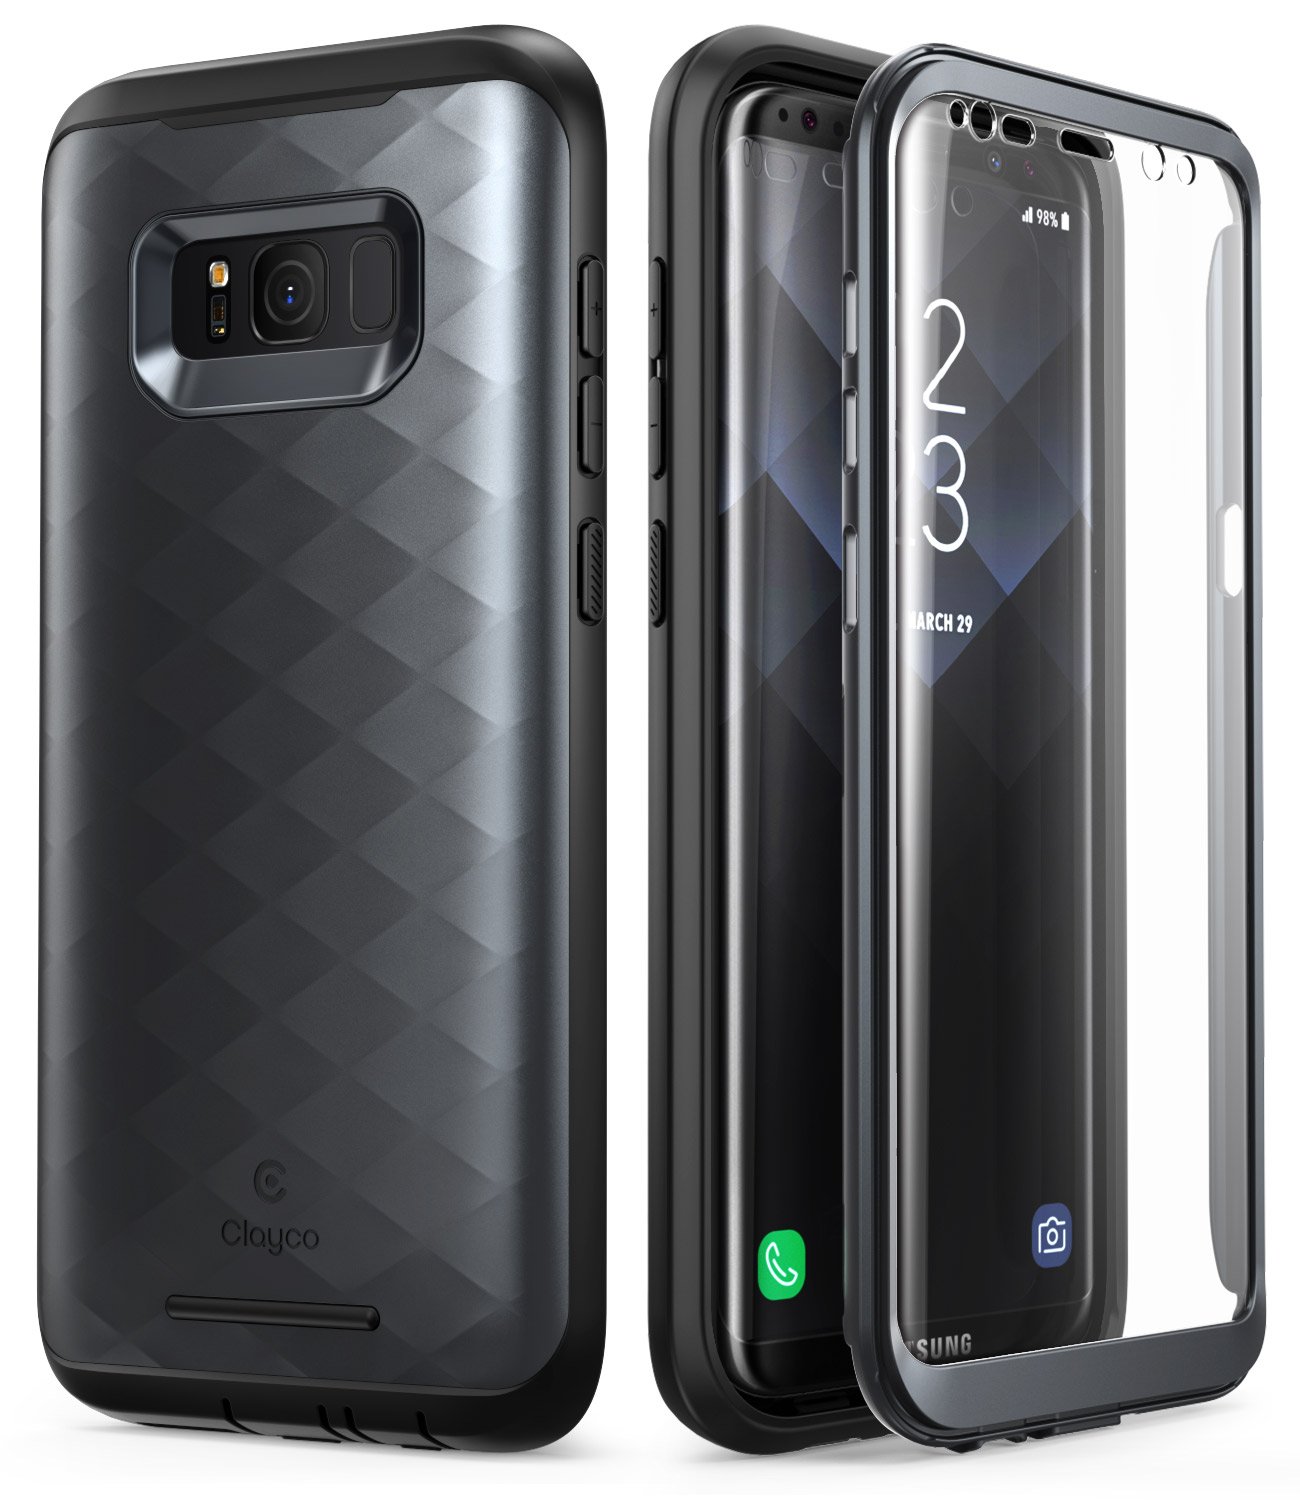 Clayco Galaxy S8+ Plus Case, [Hera Series] Full-Body Rugged Case with Built-in Screen Protector for Samsung Galaxy S8+ Plus (2017 Release) (Black)